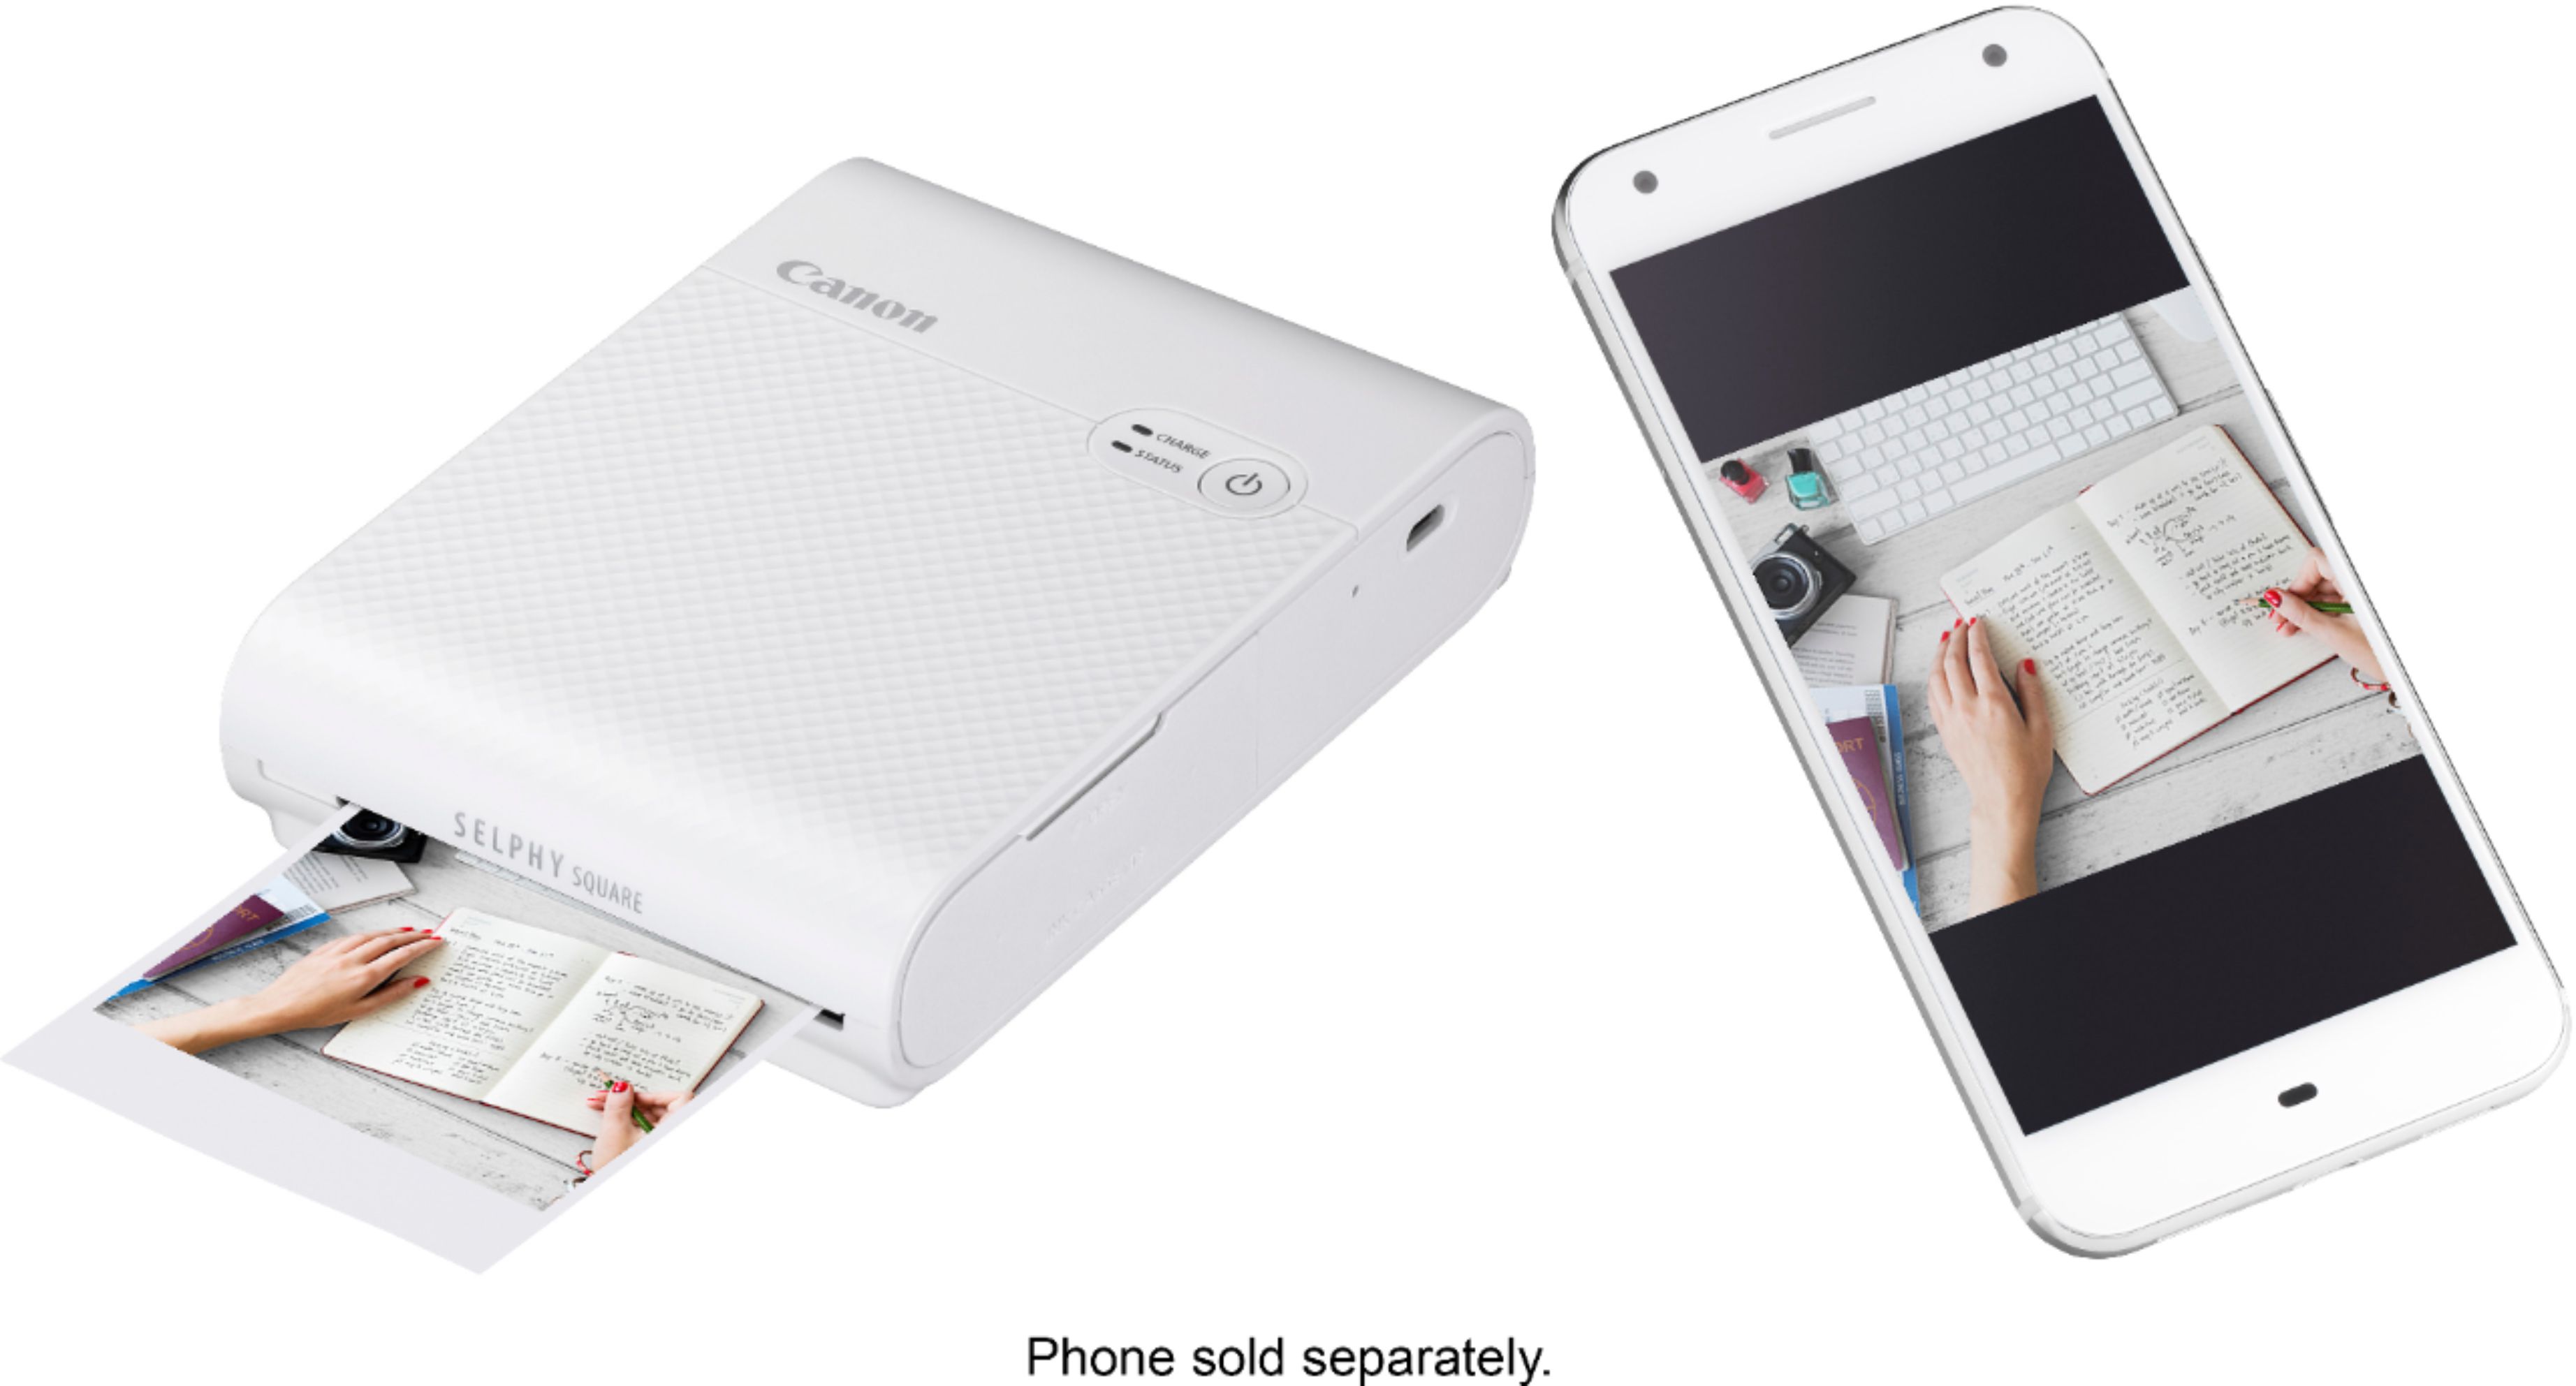 Canon SELPHY Square QX10 Wireless Photo Printer White 4108C002 - Best Buy